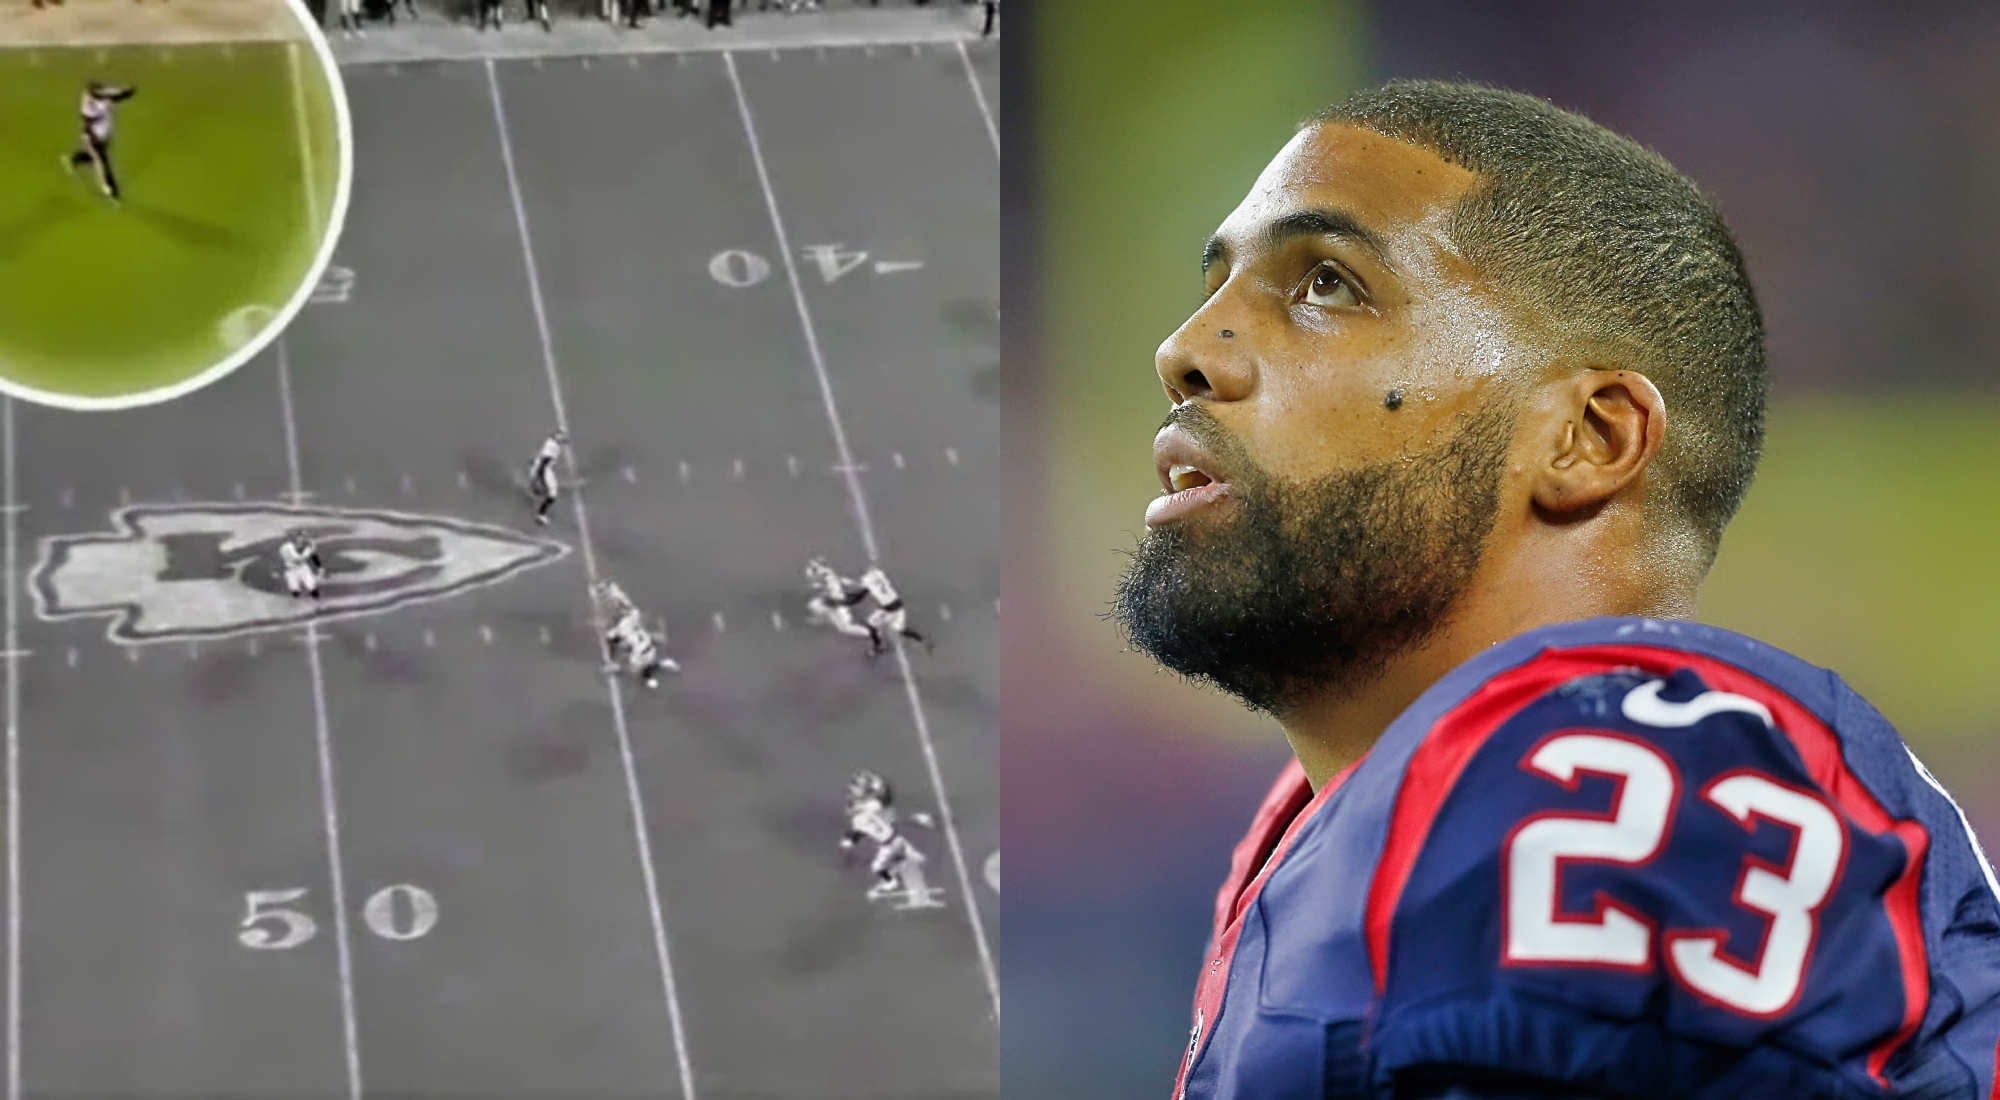 Arian Foster Fuels 'NFL Is Rigged' Theory With Wild Claim